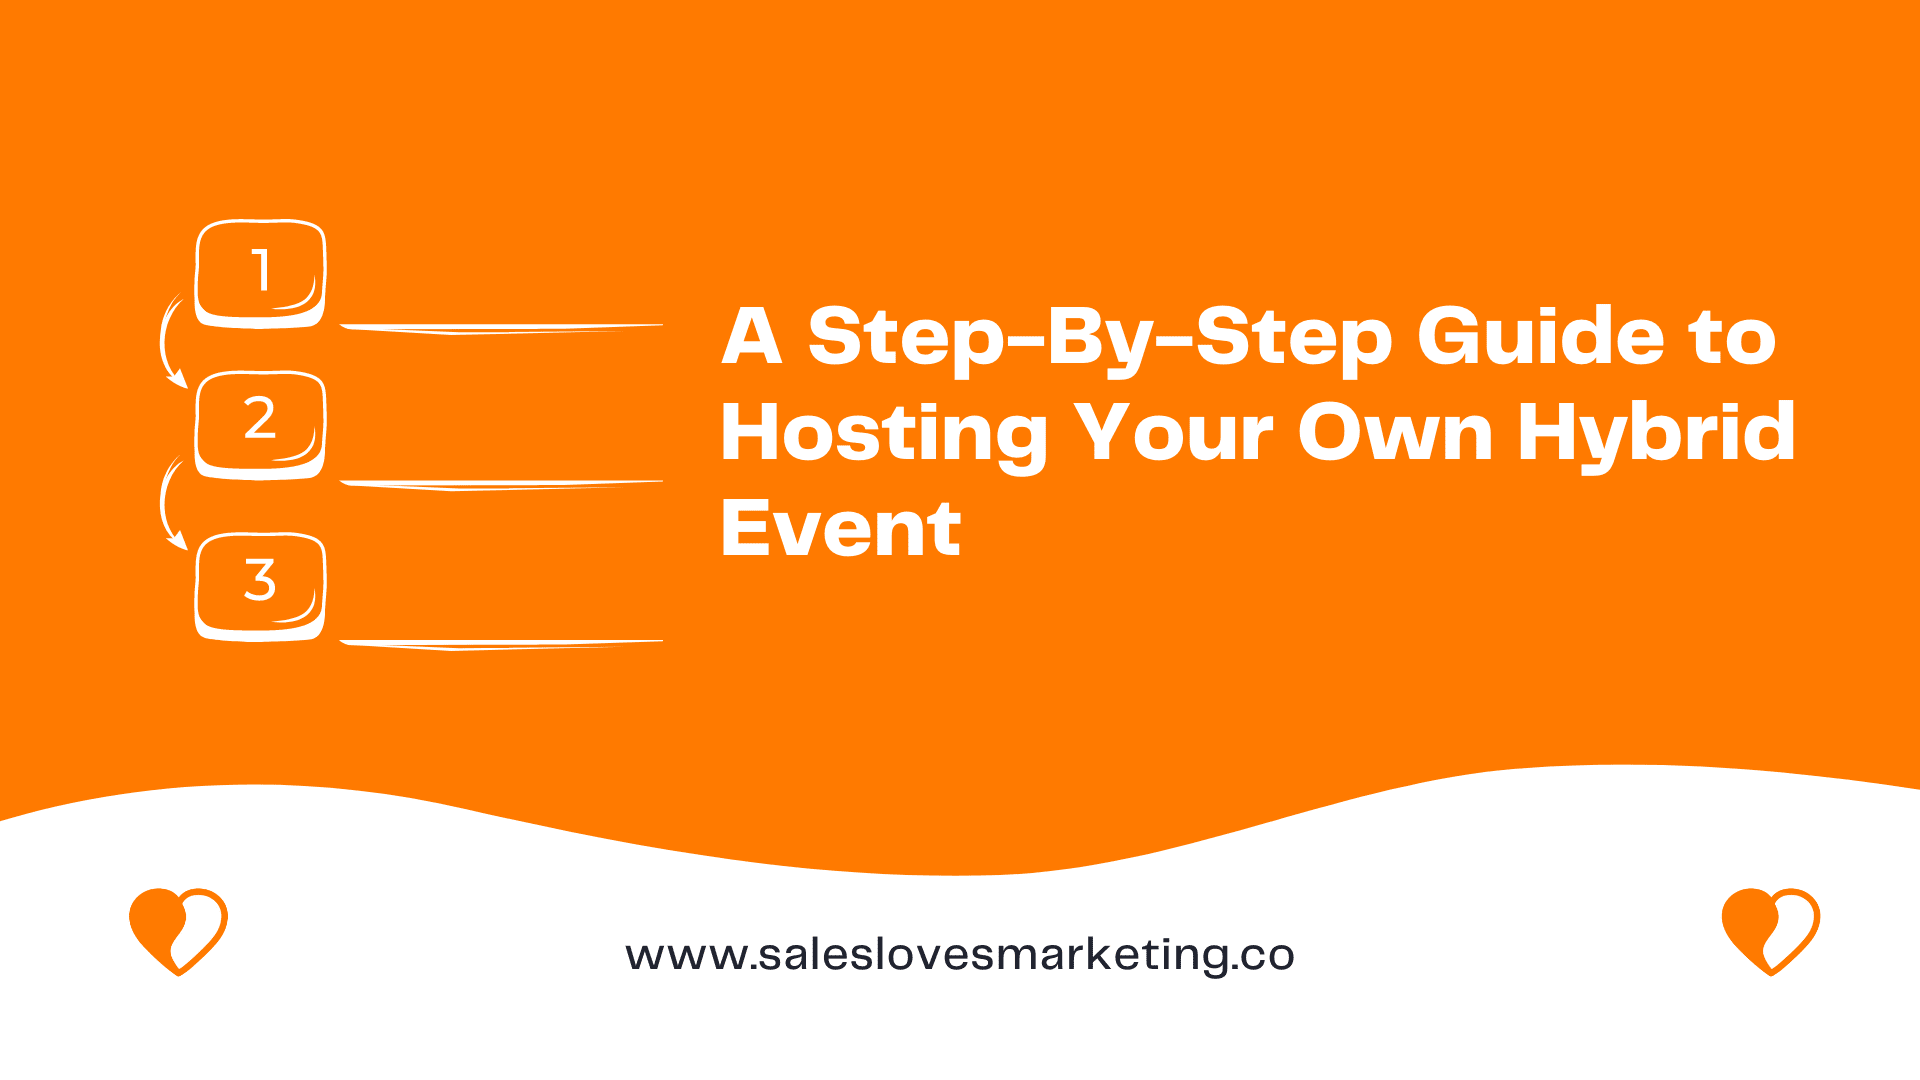 A Step-By-Step Guide to Hosting Your Own Hybrid Event